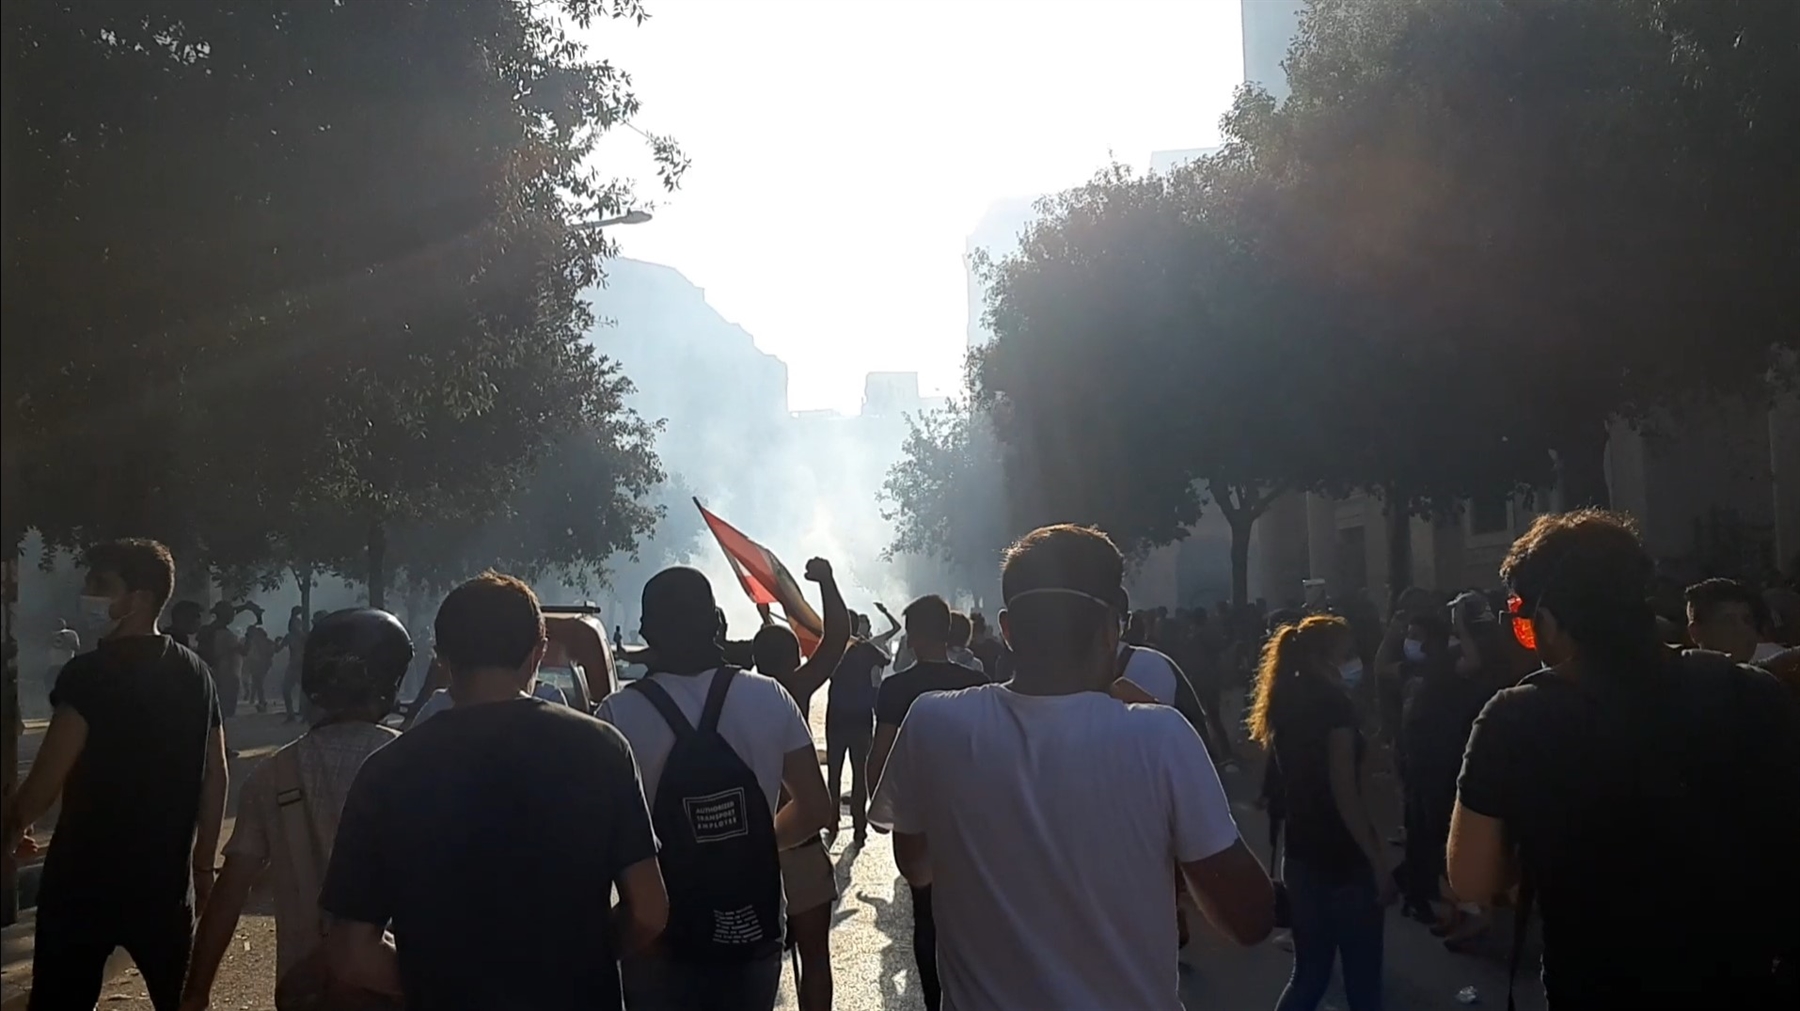 Protest on Saturday, August 8, when tear gas and live ammunition were fired at protesters, and more than 700 were injured (Photo: Dounia Salamé)